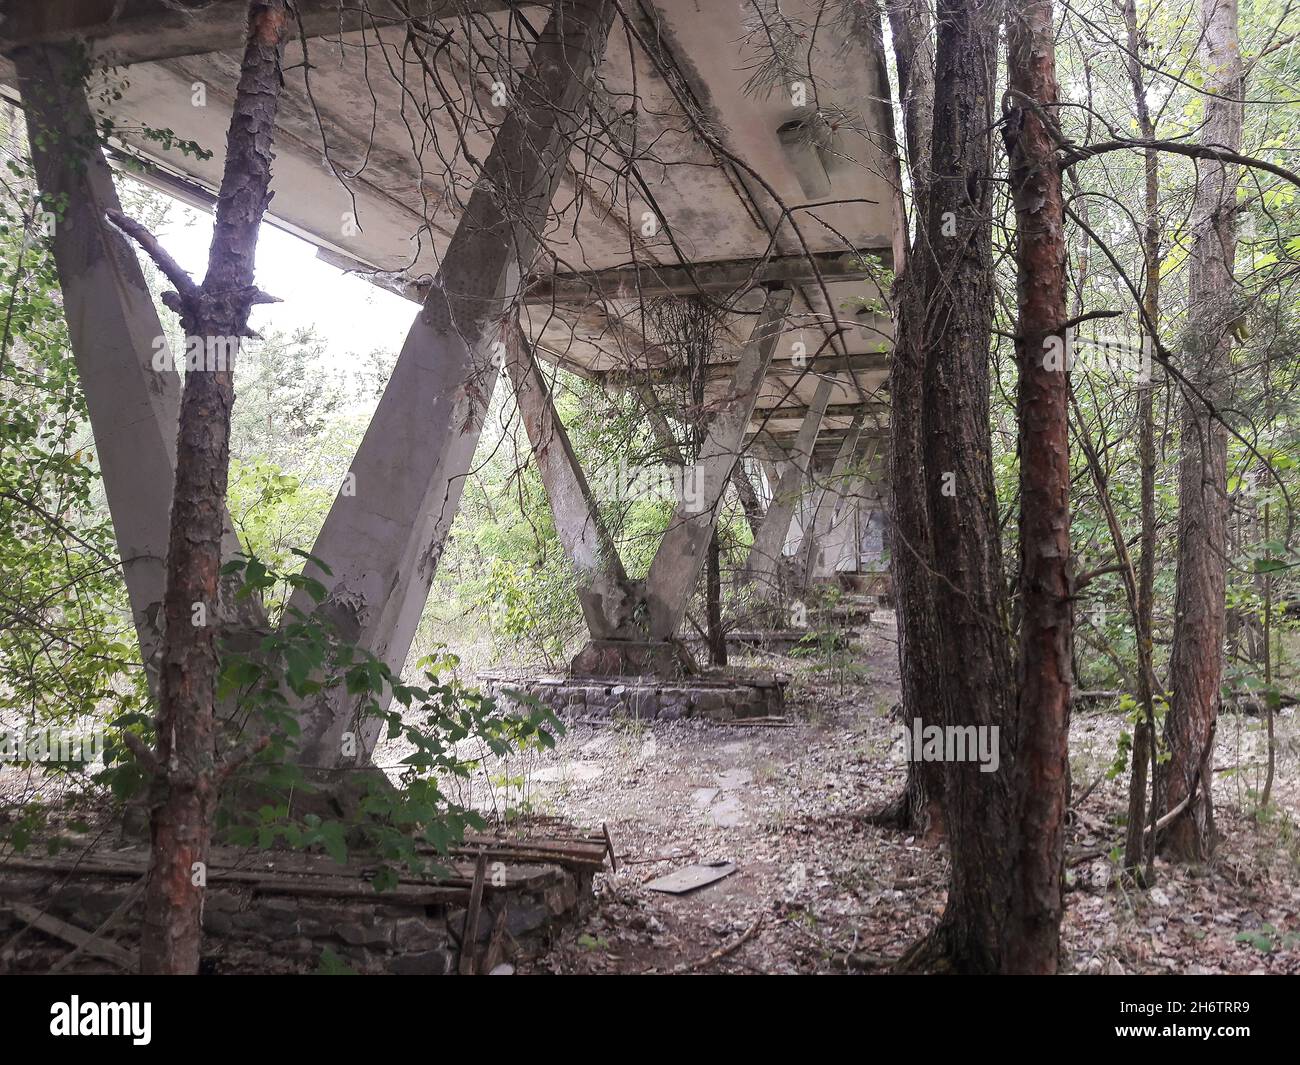 Dry trees under an abandoned dilapidated non-working concrete bridge in the forest Stock Photo